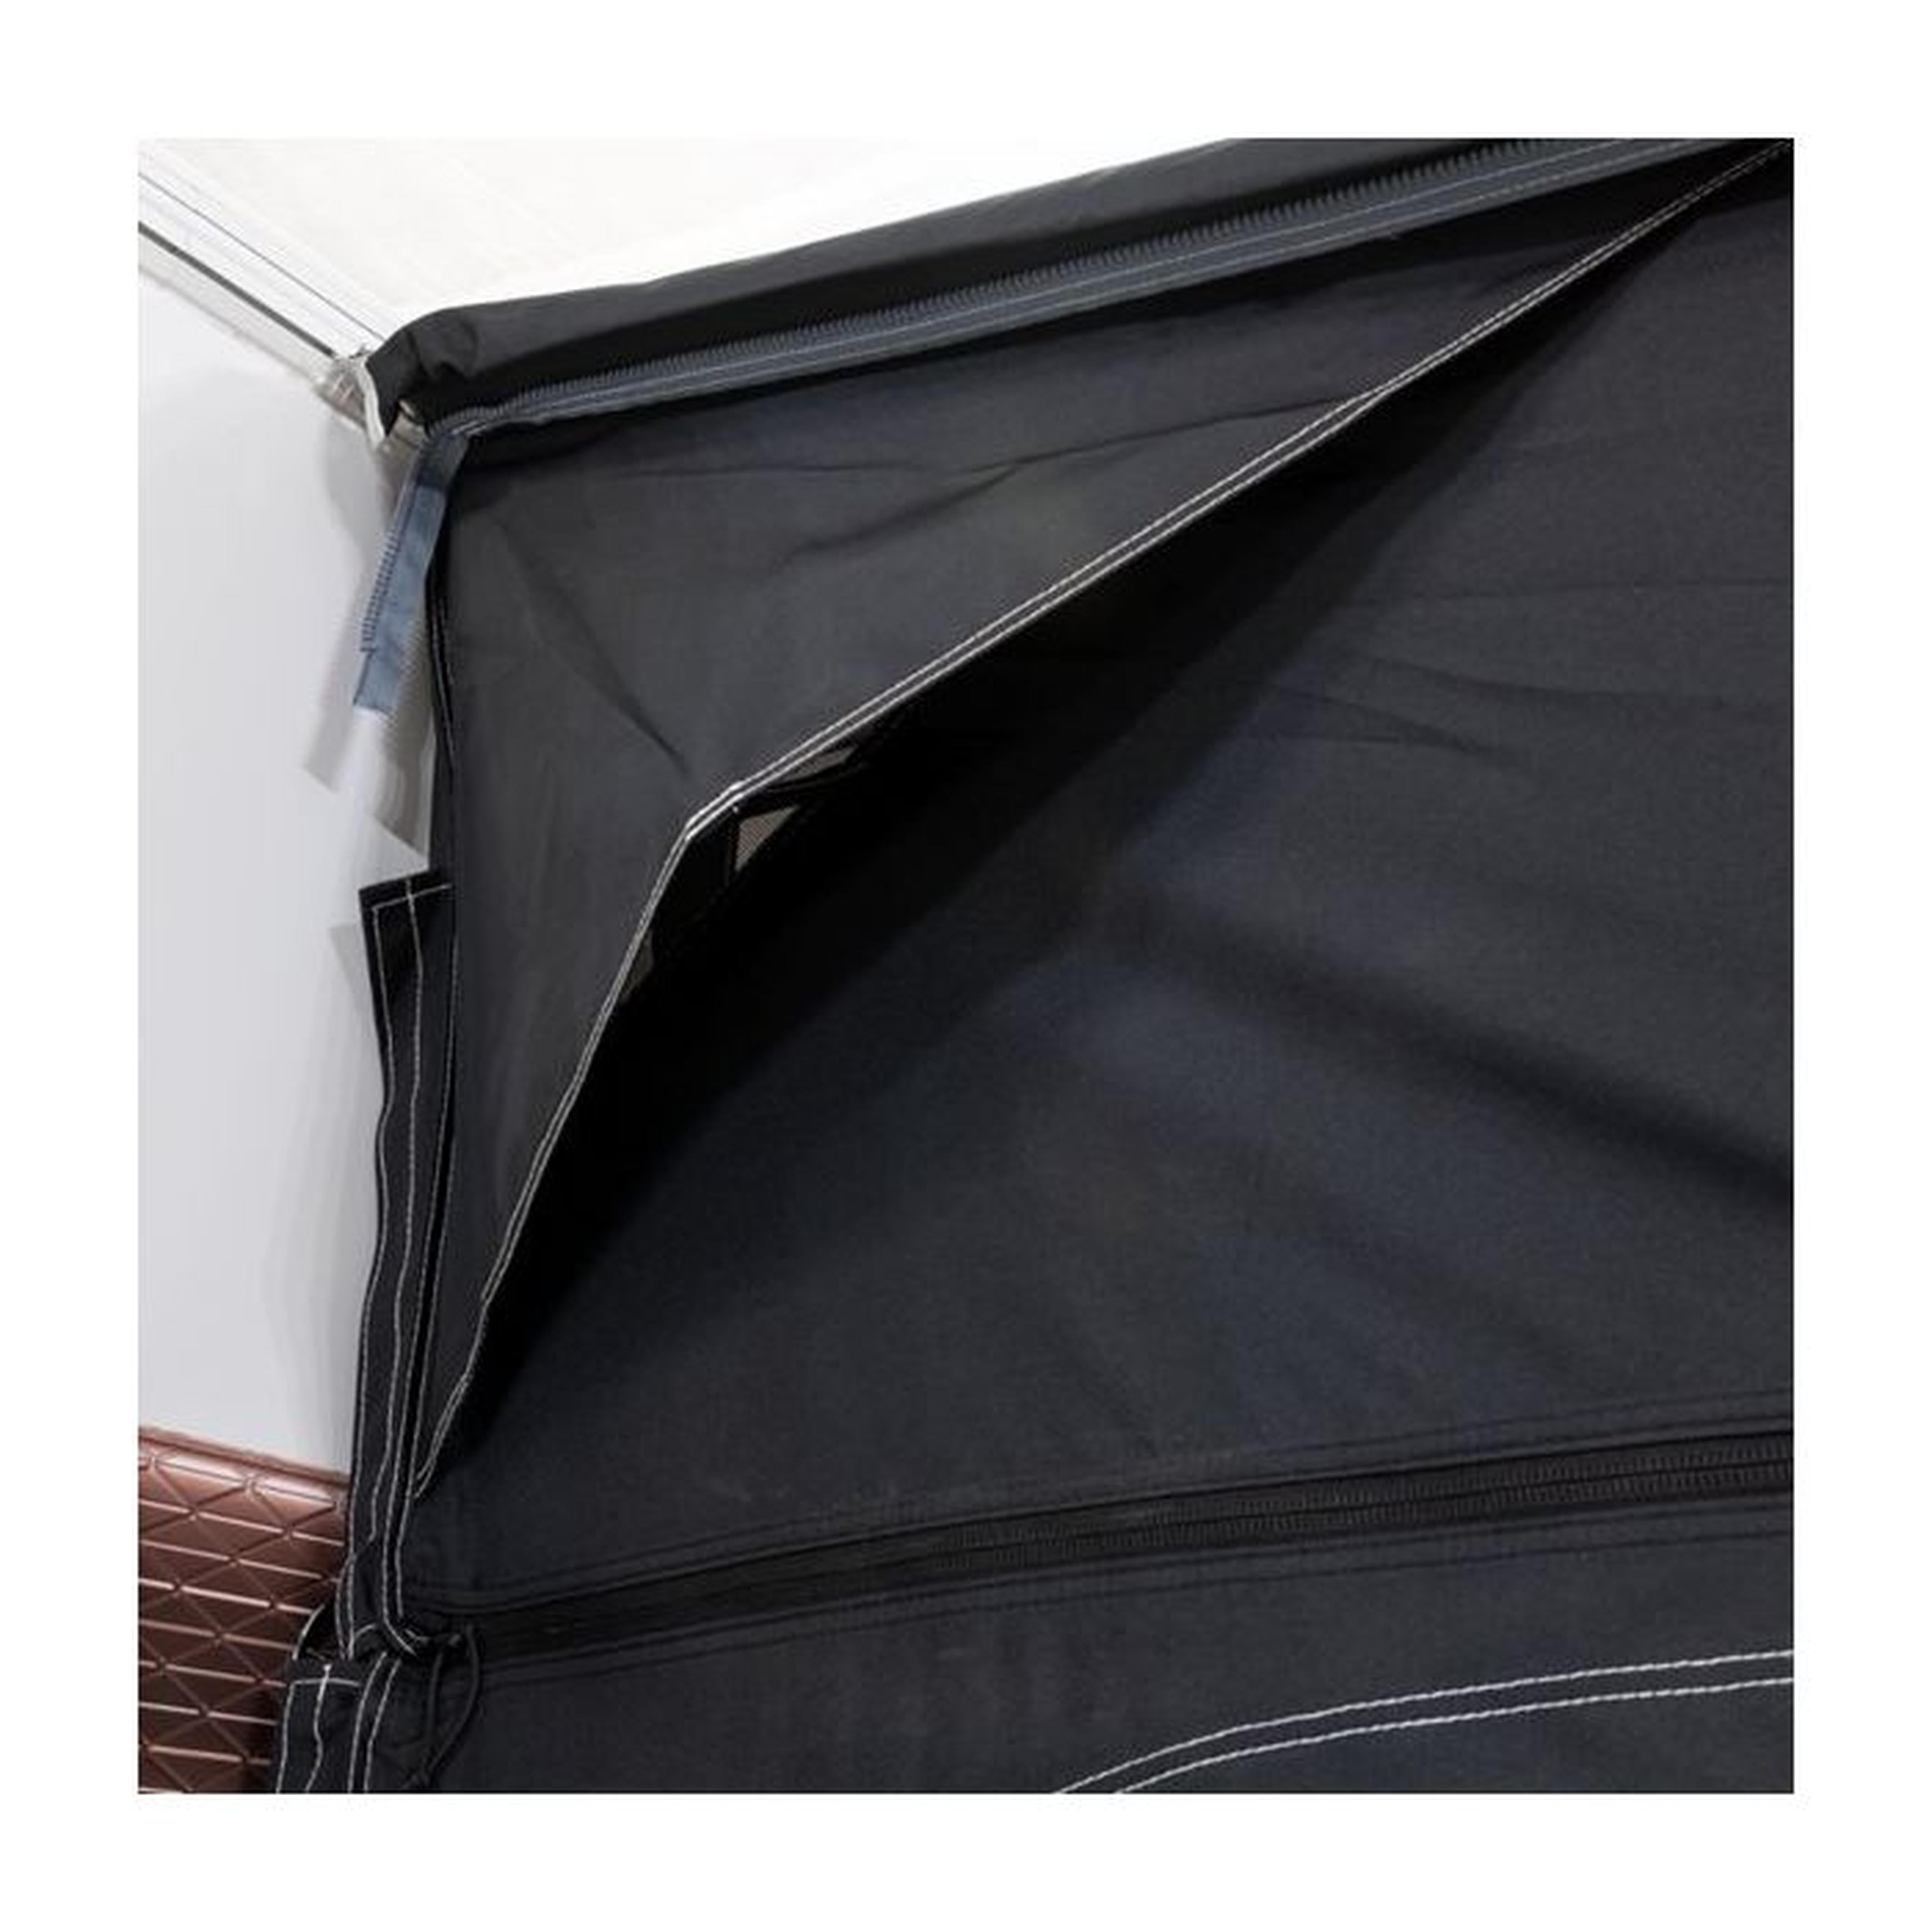 Dometic Ace Air Pro 400 S Awning 2022 Model - corner view